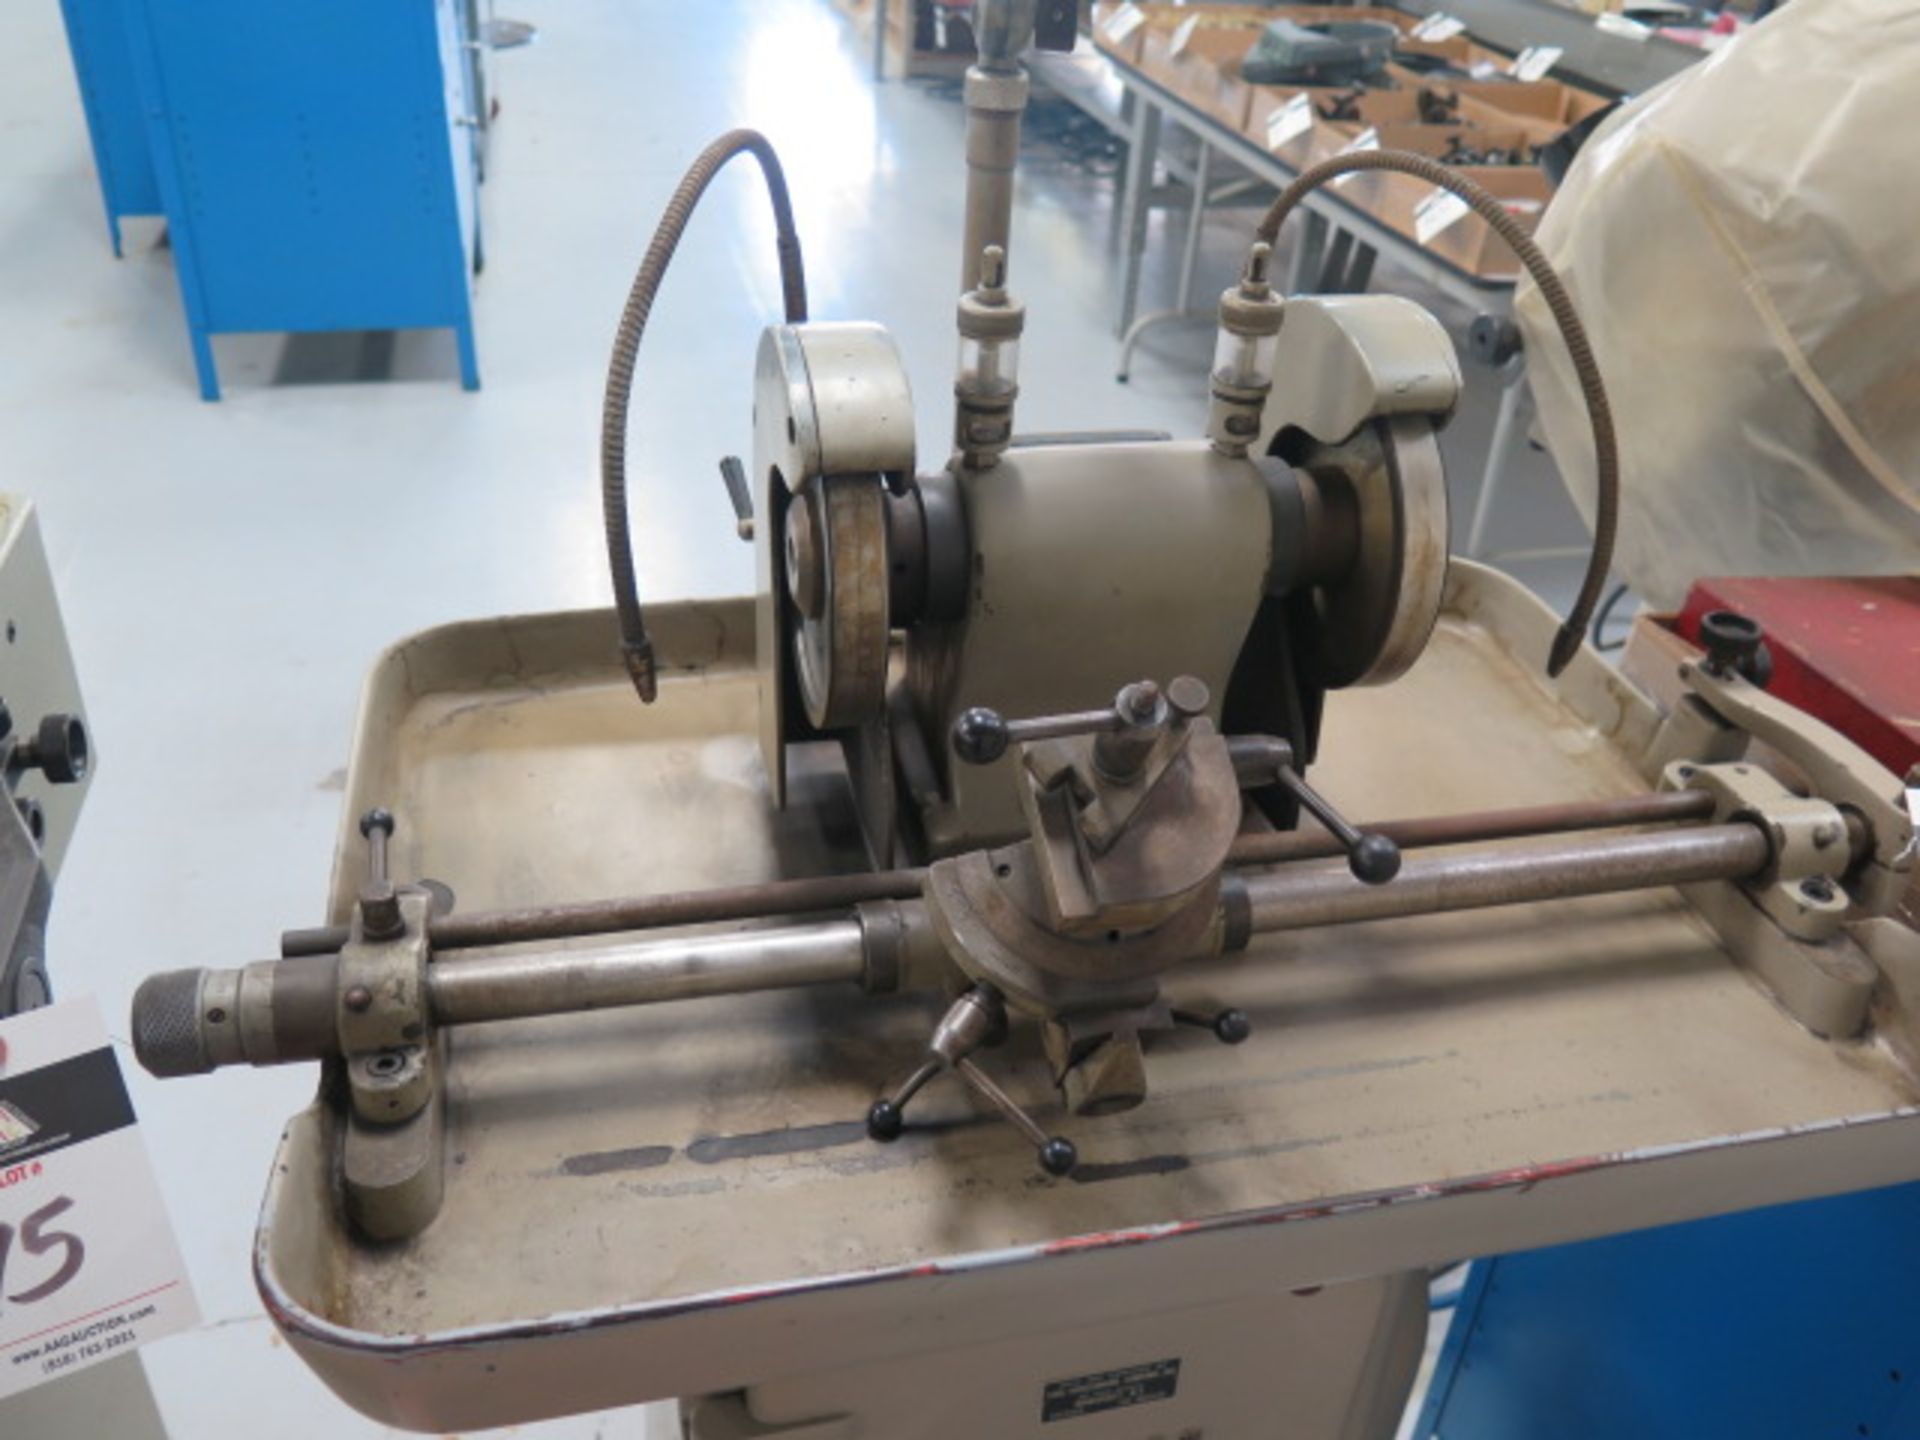 Agathon Type 150A Precision Tool Grinder s/n 826-3402 w/ Diamond Grinding Wheels, Coolant - Image 2 of 5